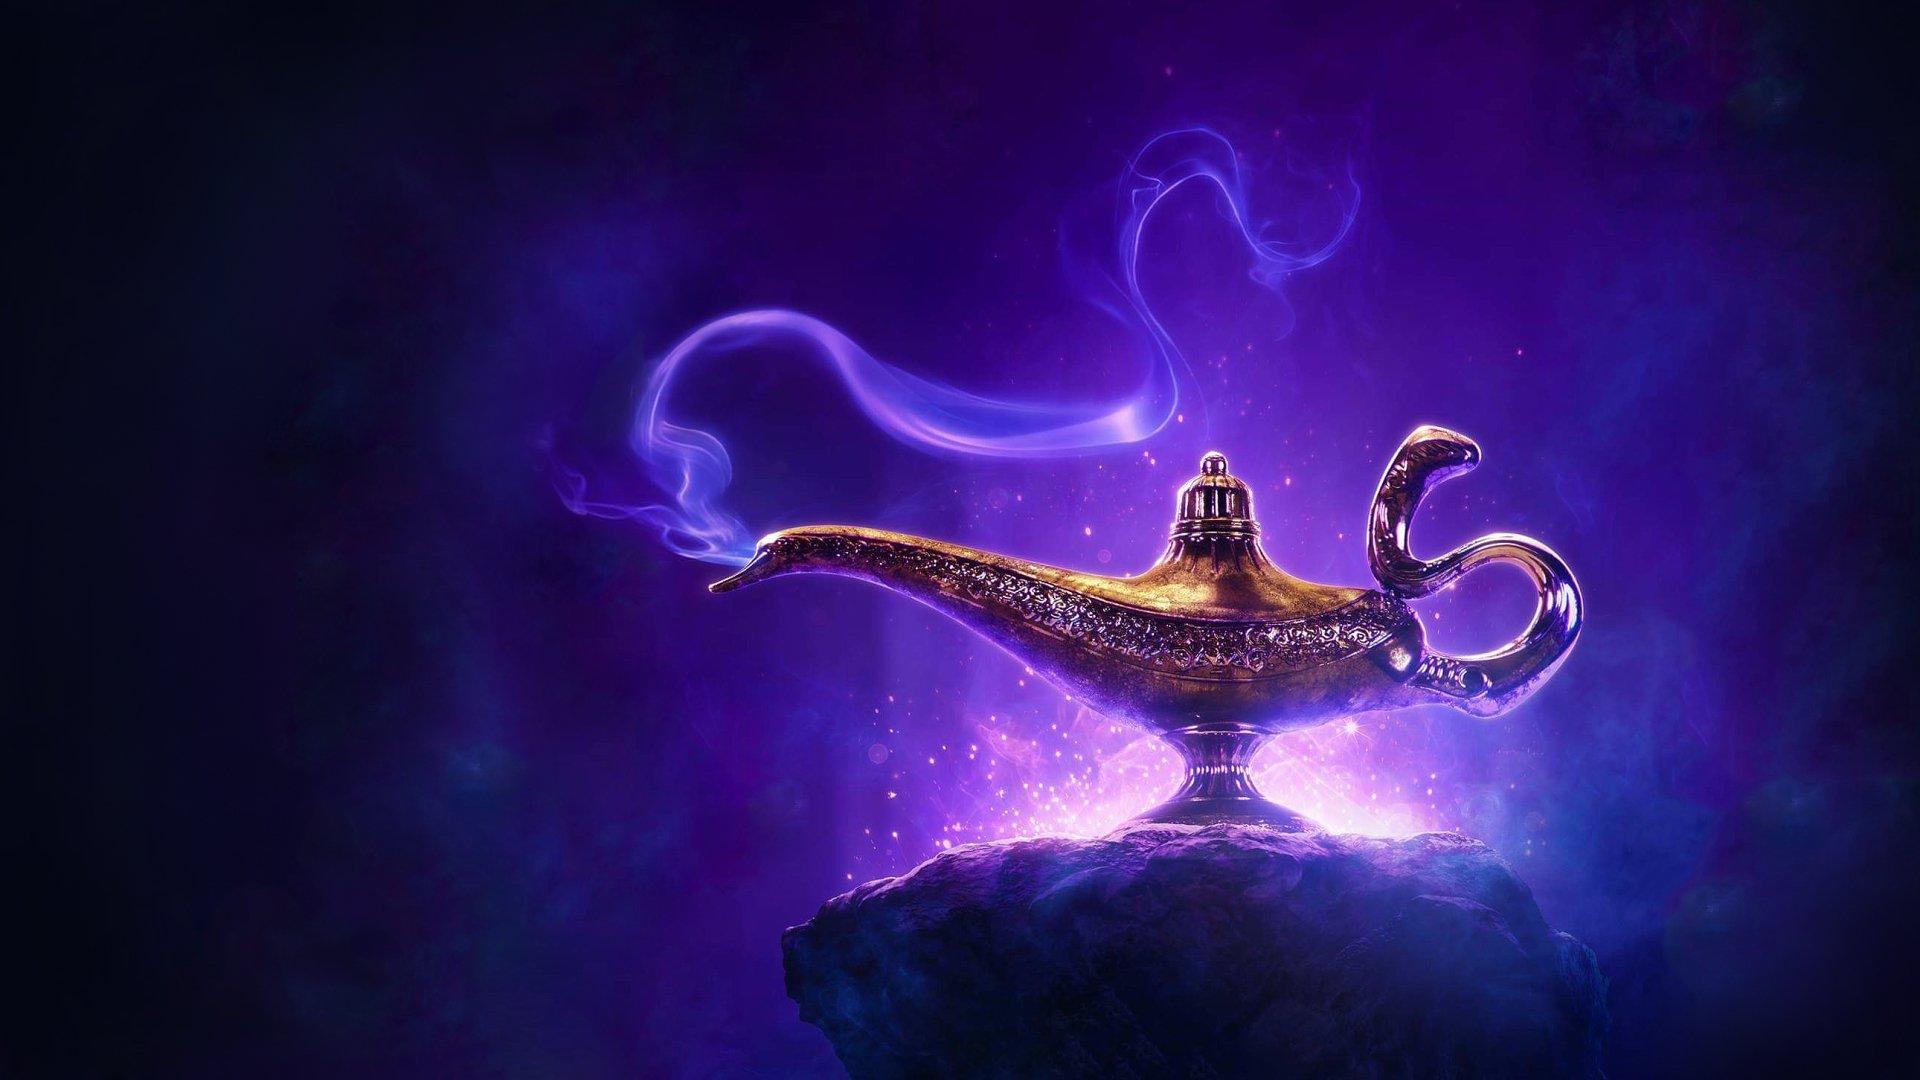 Aladdin (2019) HD Wallpaper and Background Image